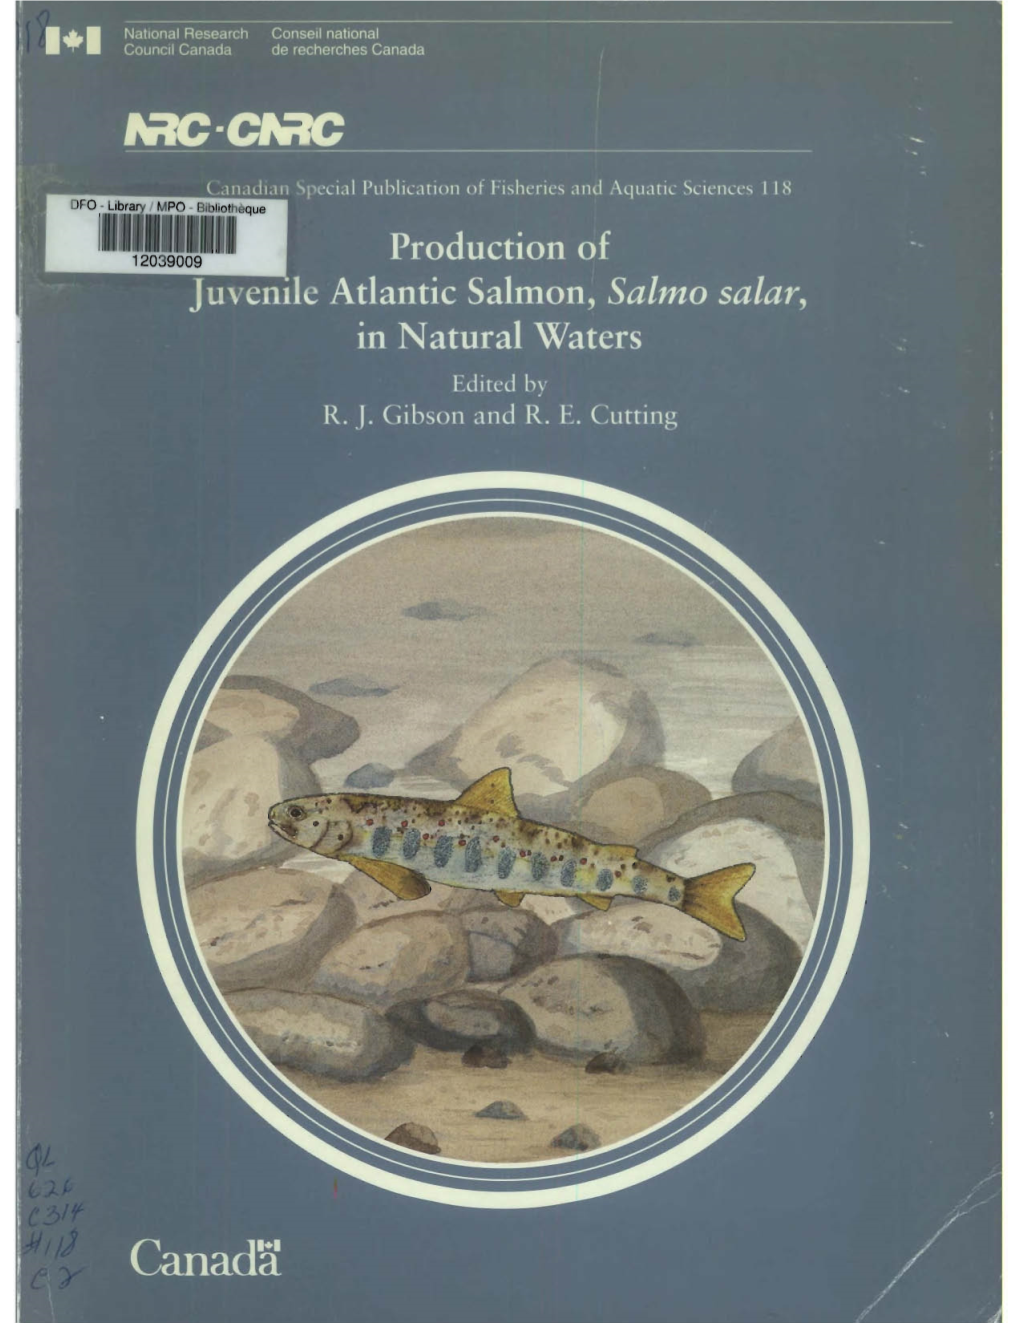 Production of Juvenile Atlantic Salmon, Salmo Salar, in Natural Waters Edited by R